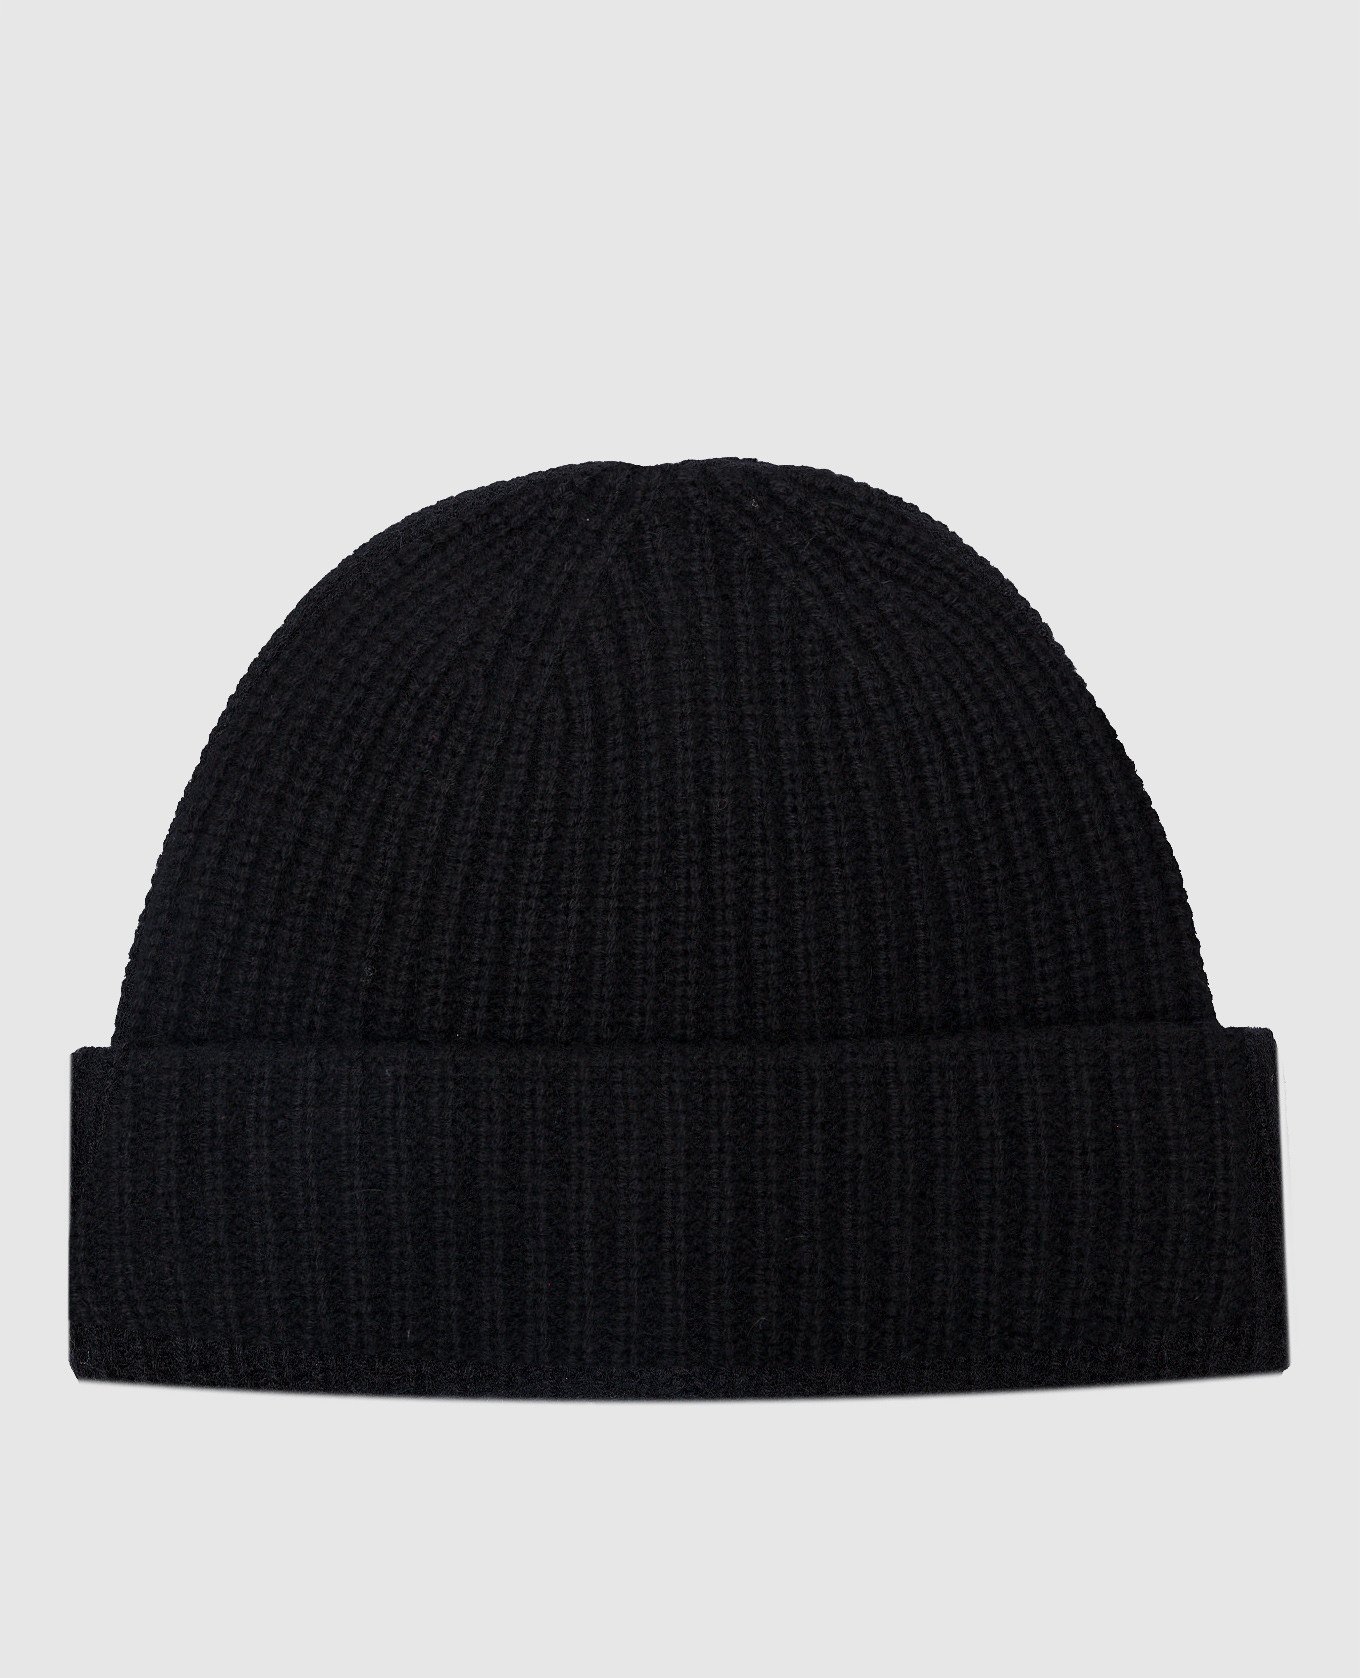 Black cap made of wool and cashmere